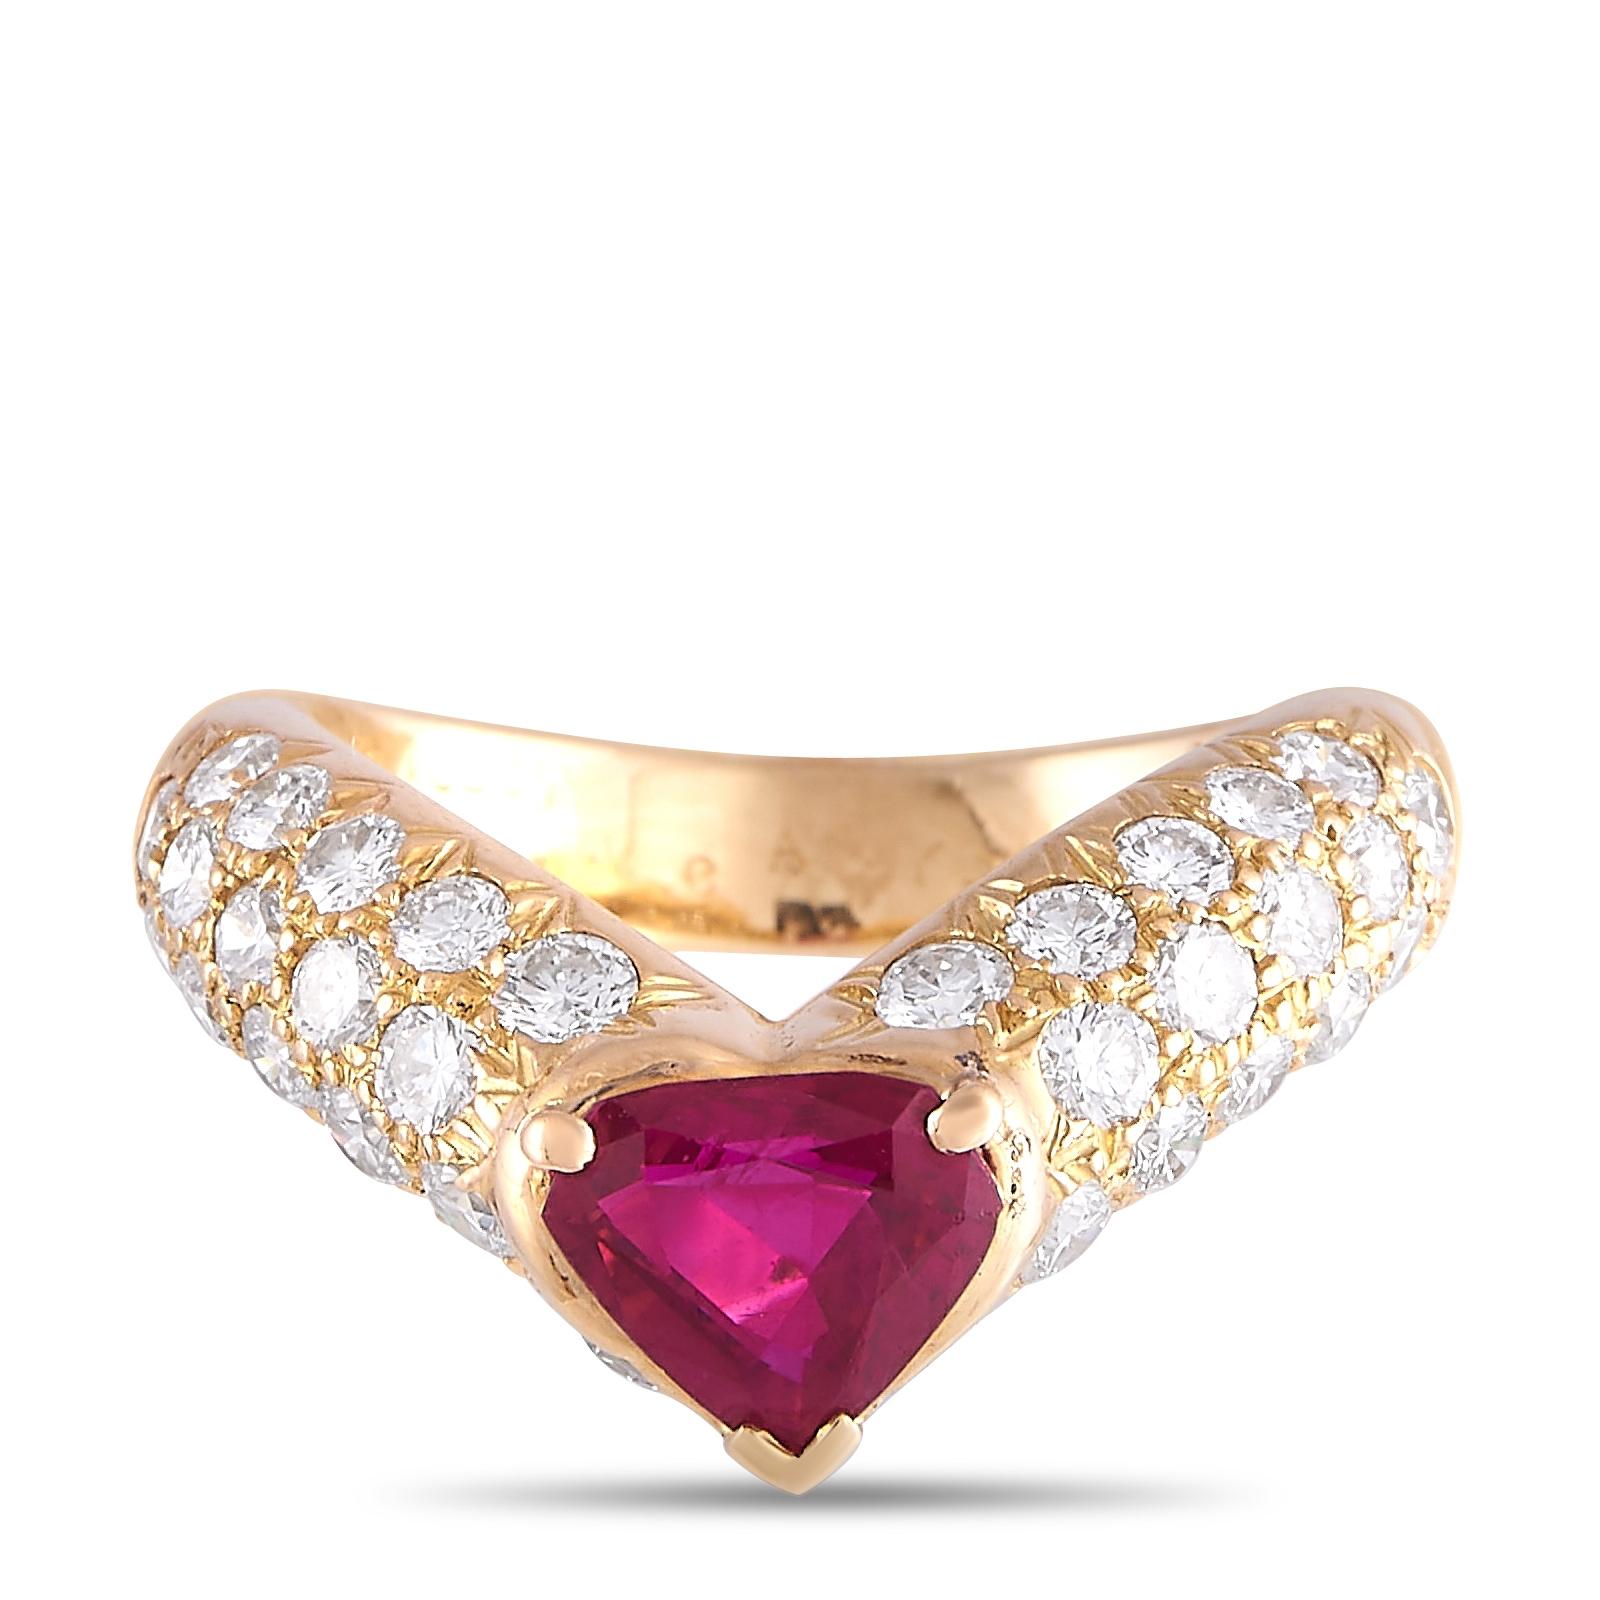 Round Cut Van Cleef & Arpels 18K Yellow Gold 1.09 Ct Diamond and Ruby Ring